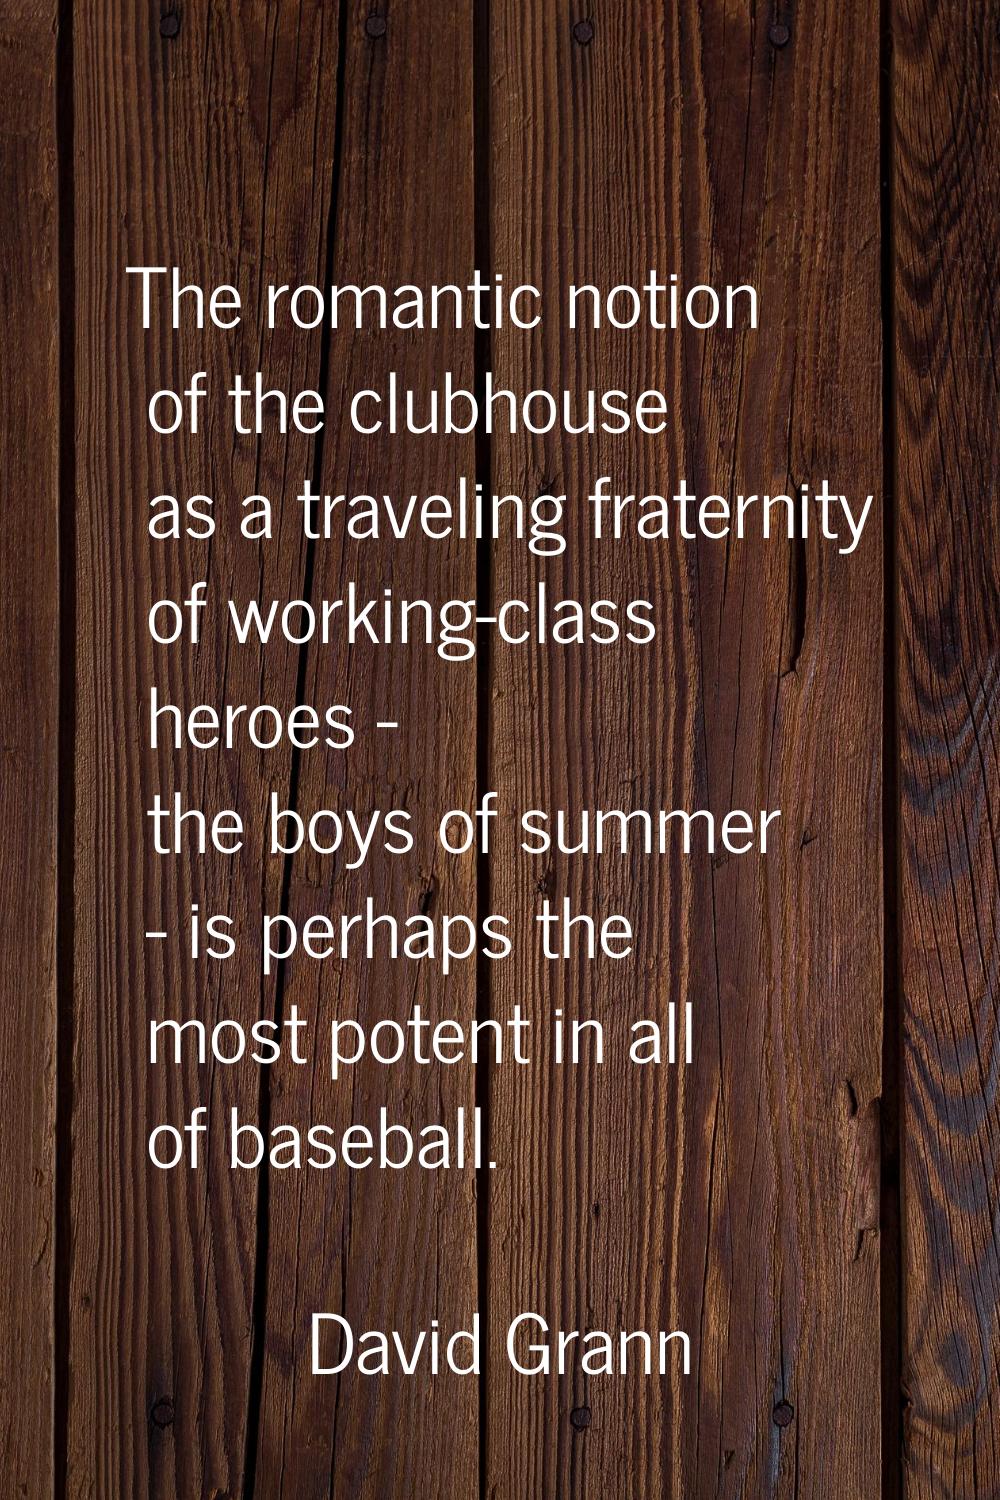 The romantic notion of the clubhouse as a traveling fraternity of working-class heroes - the boys o